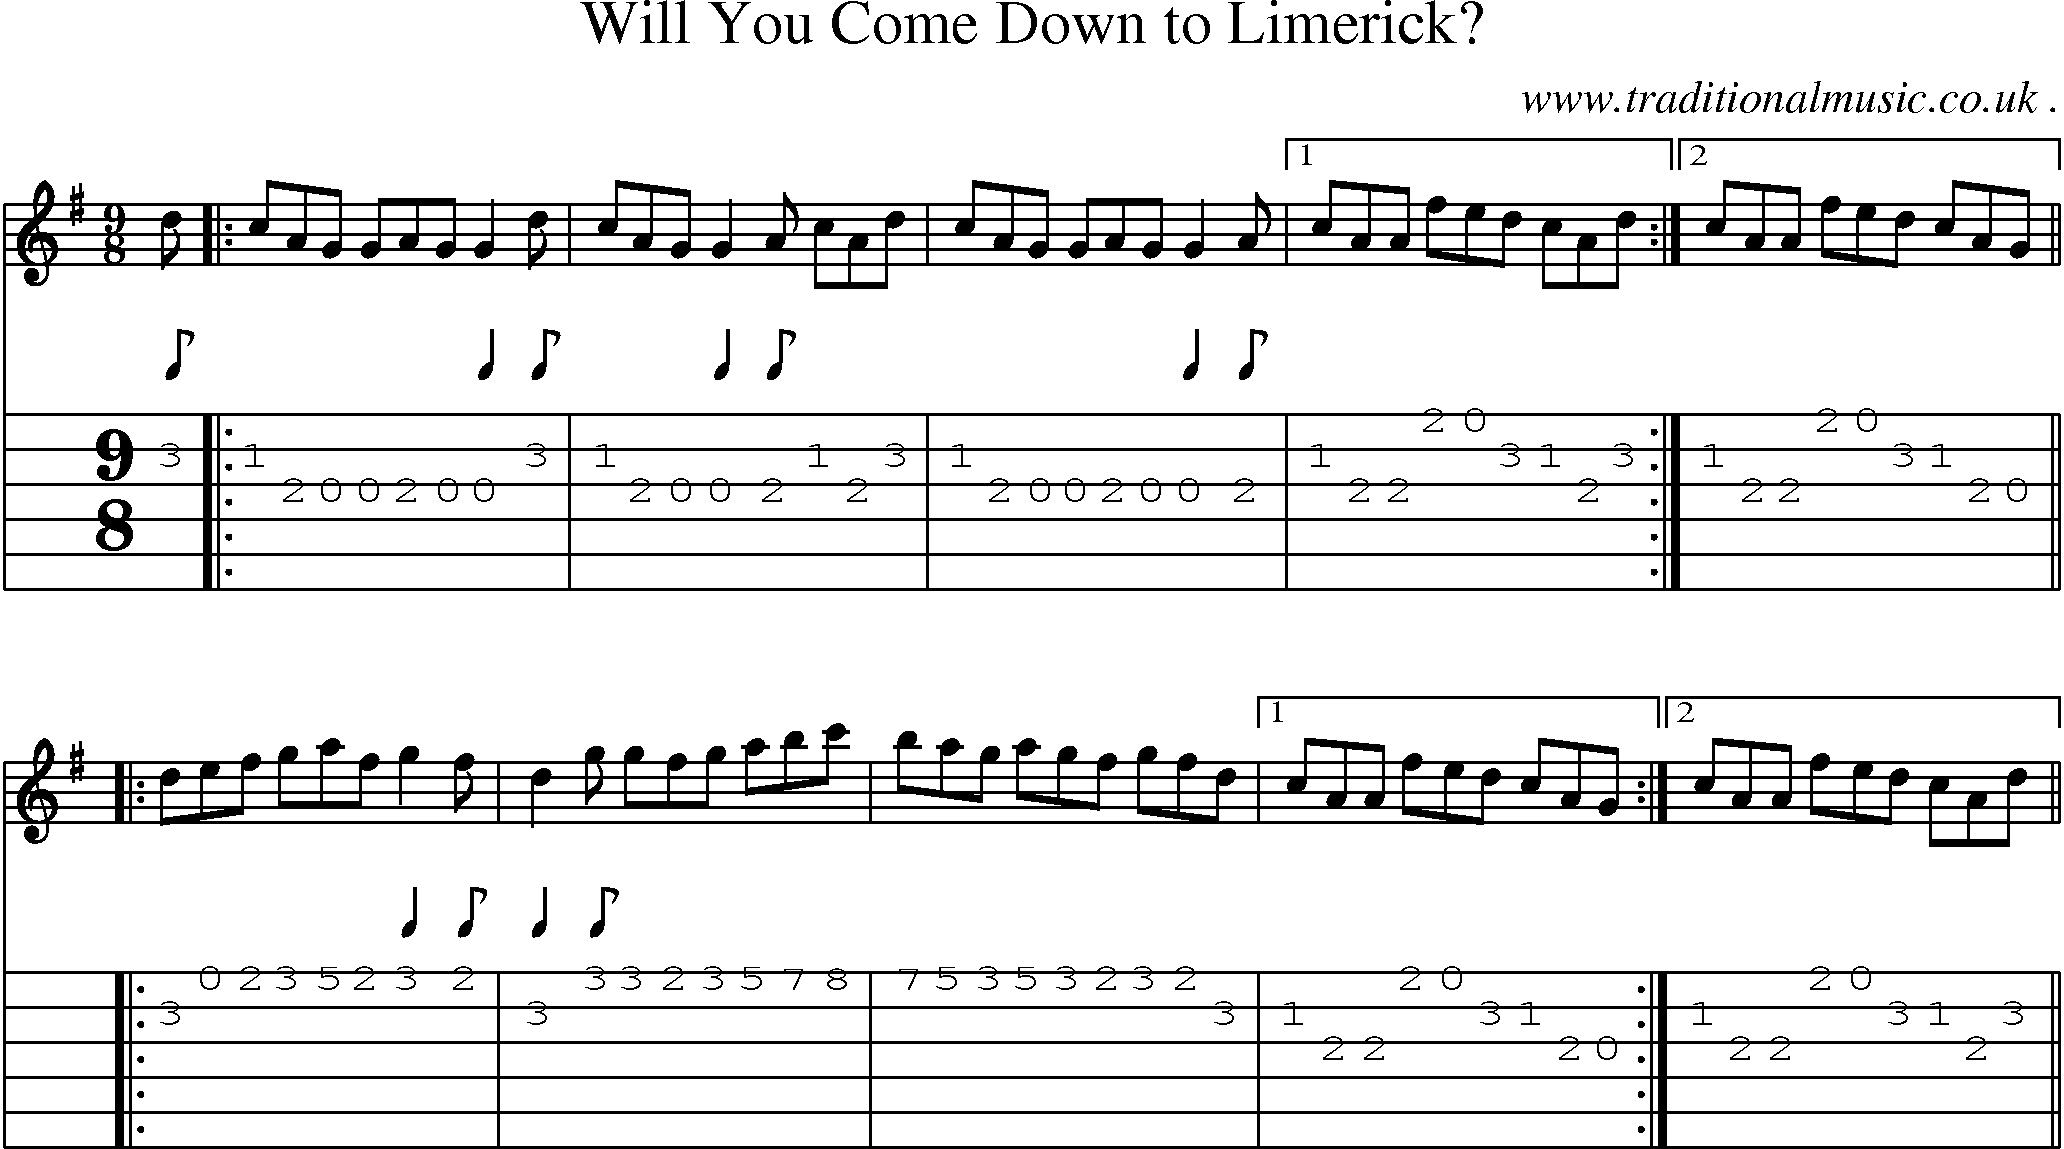 Sheet-Music and Guitar Tabs for Will You Come Down To Limerick